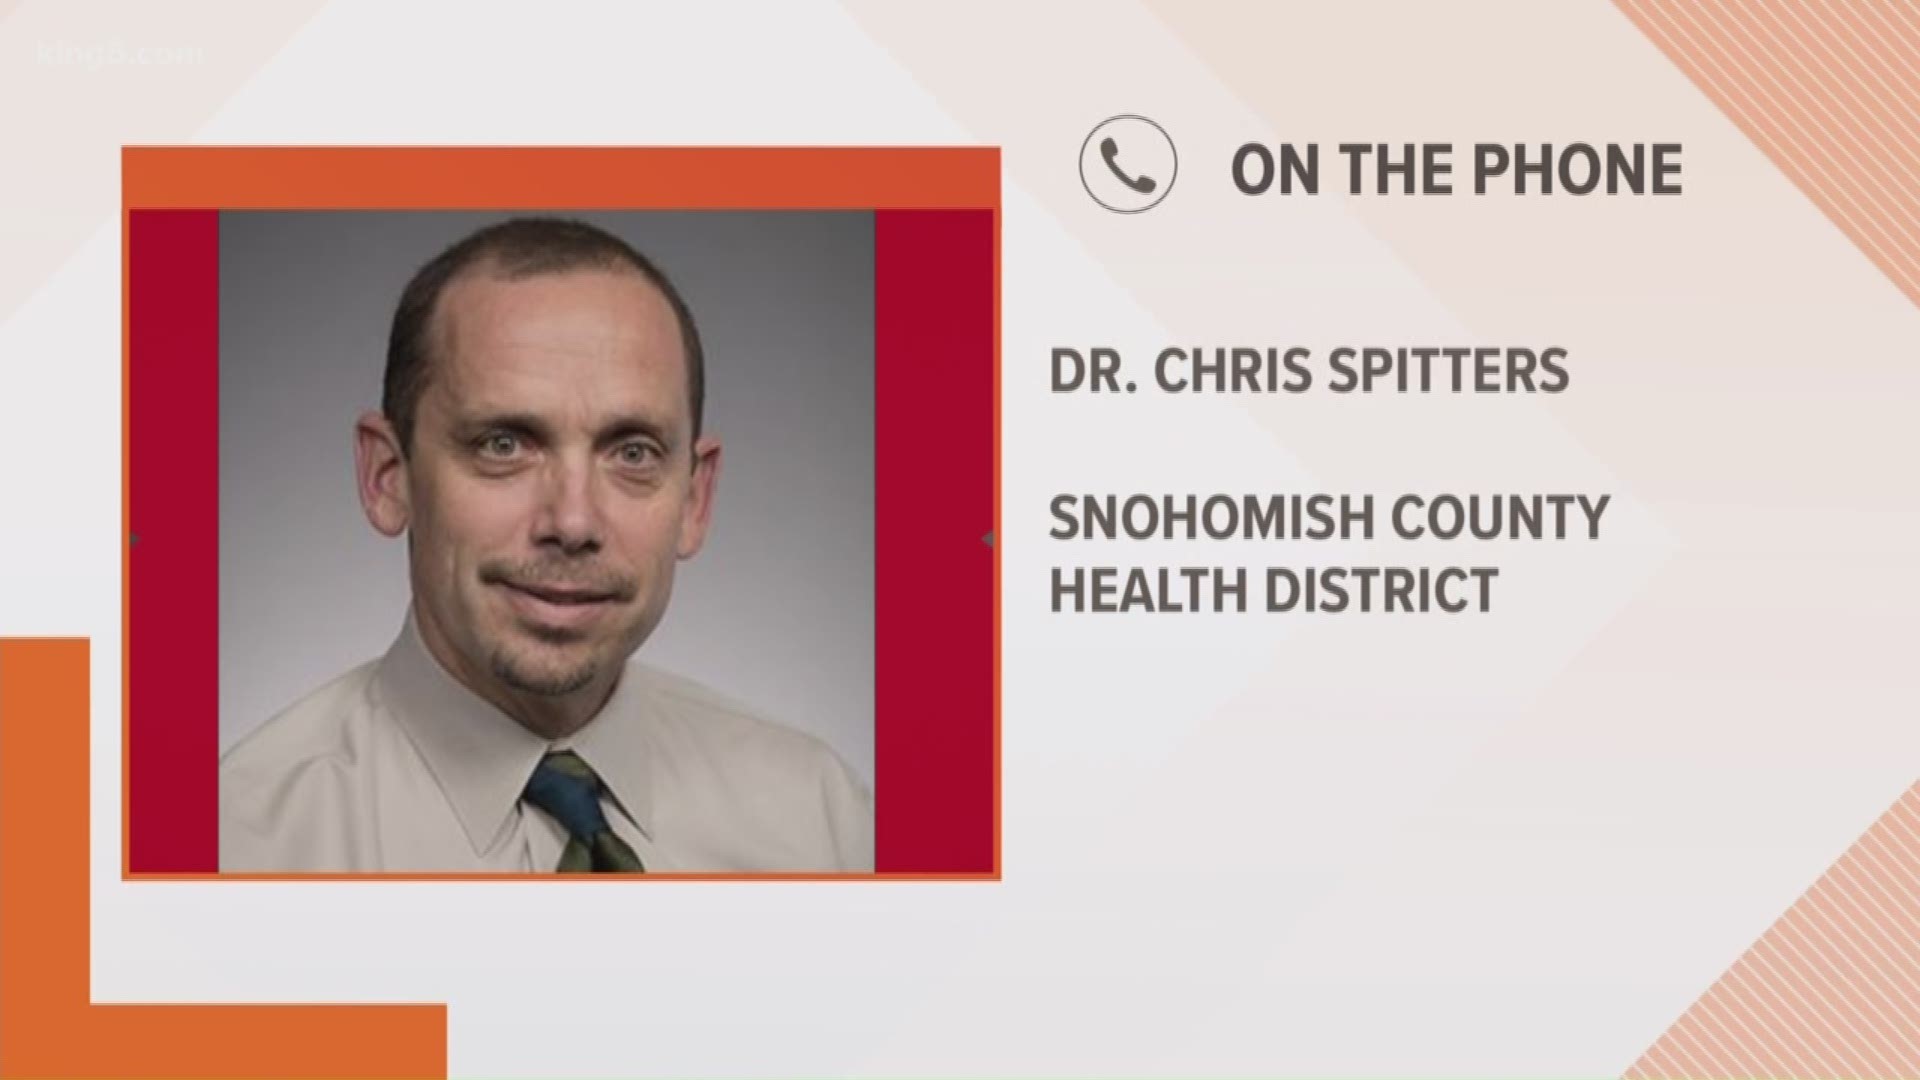 Dr. Chris Spitters with the Snohomish County Health District eases fears around the coronavirus and what you can do to stay healthy.